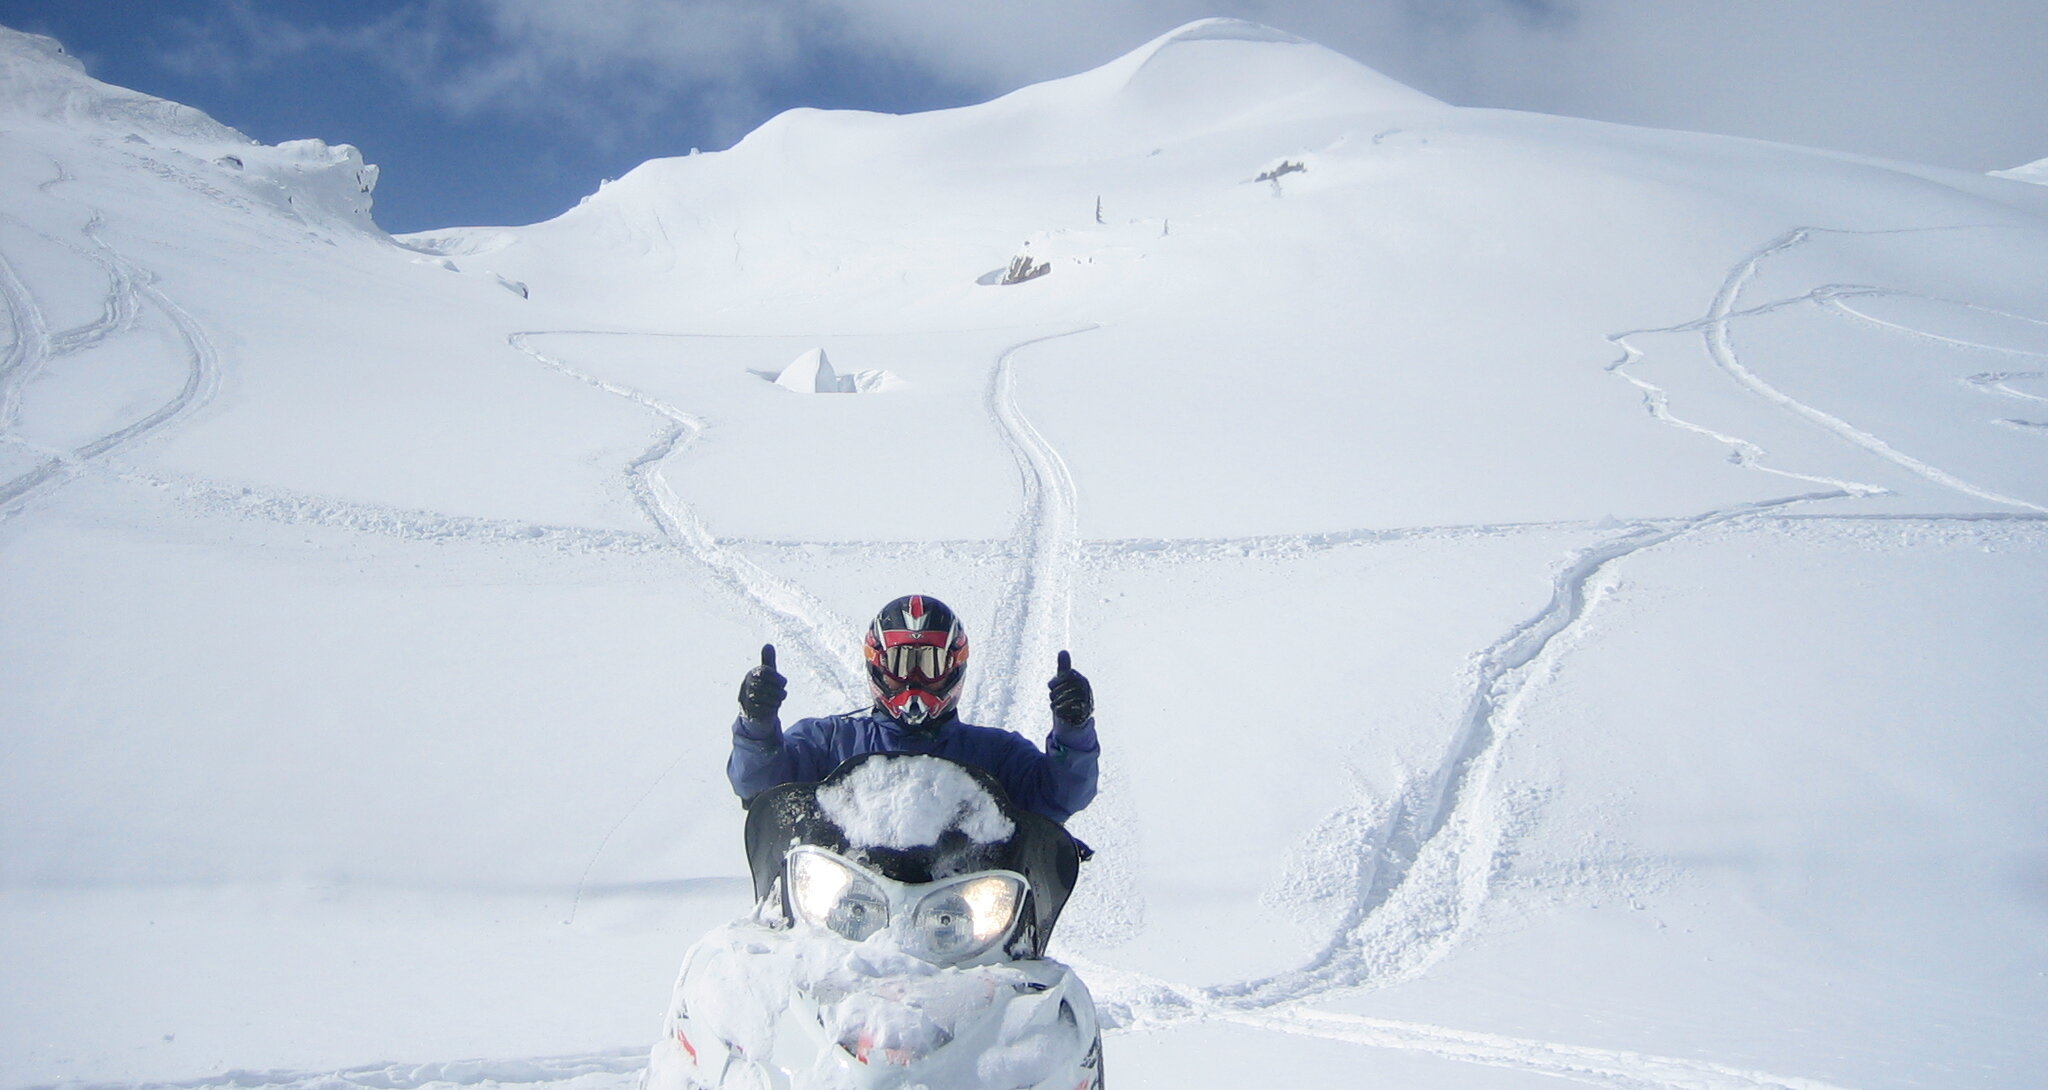 Snowmobiling in the backcountry